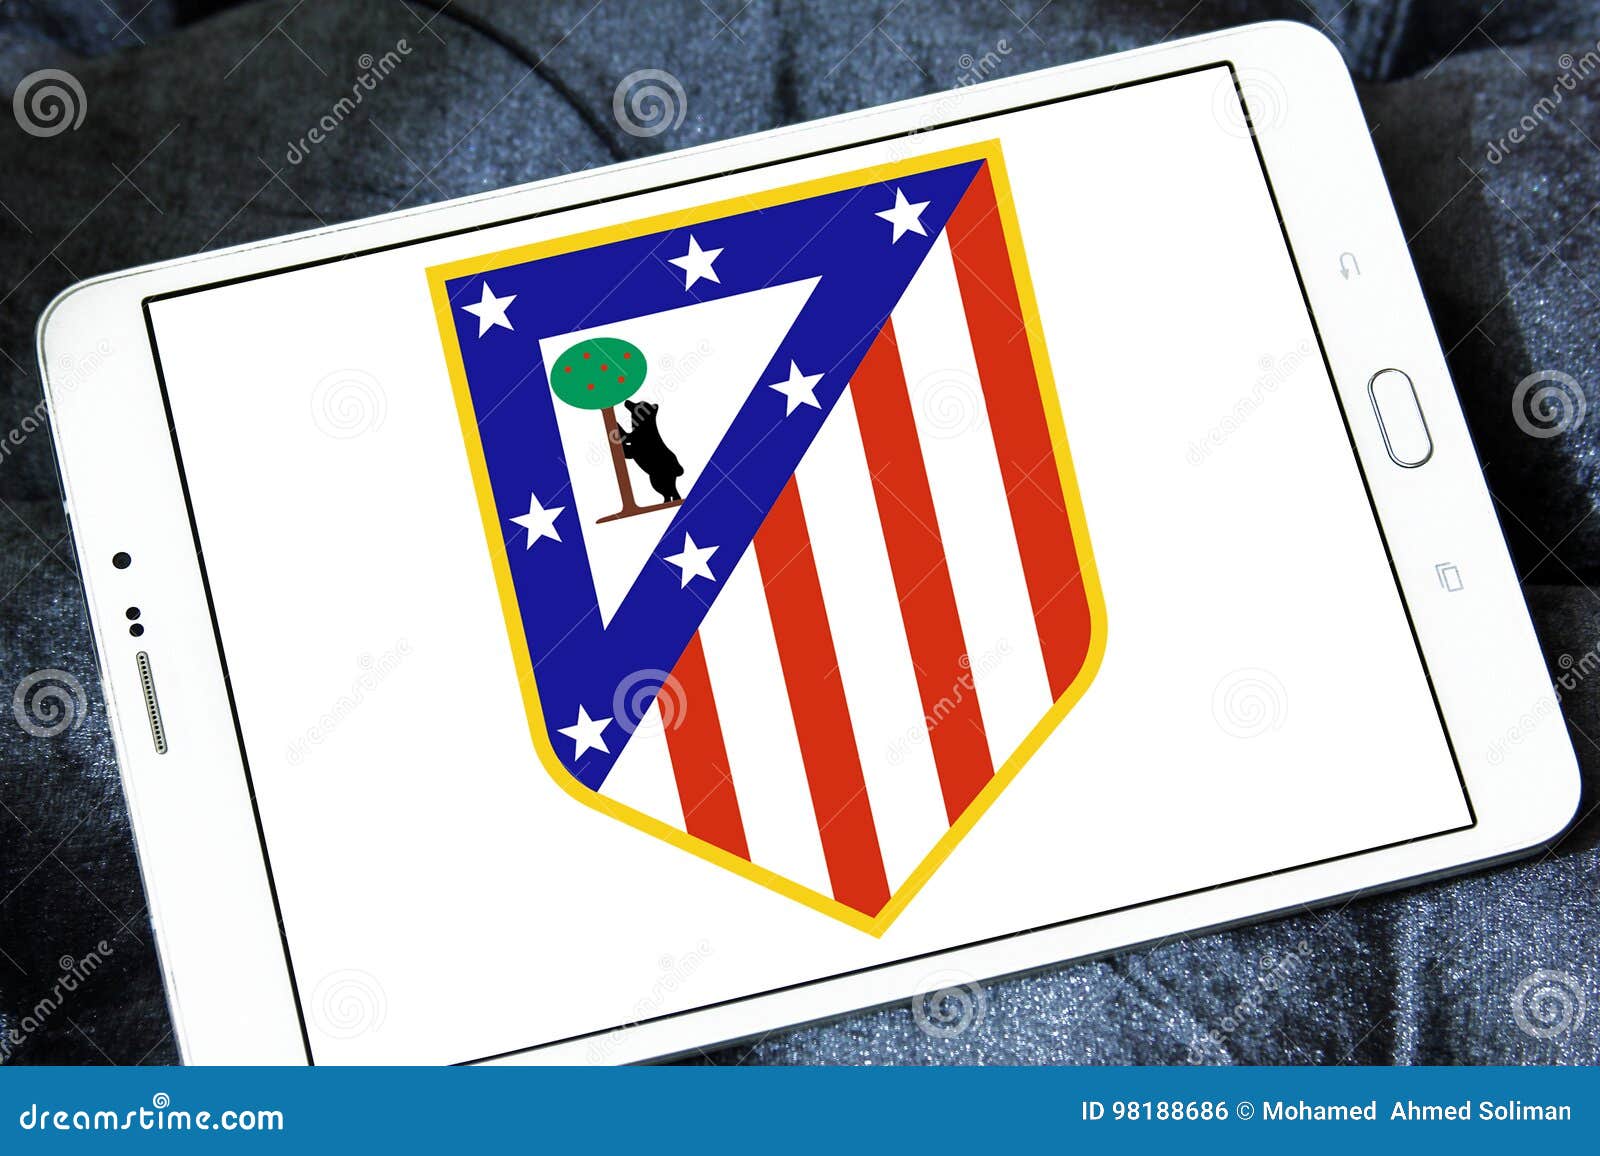 Atletico Madrid Soccer Club Logo Editorial Photo - Image of city, games ...